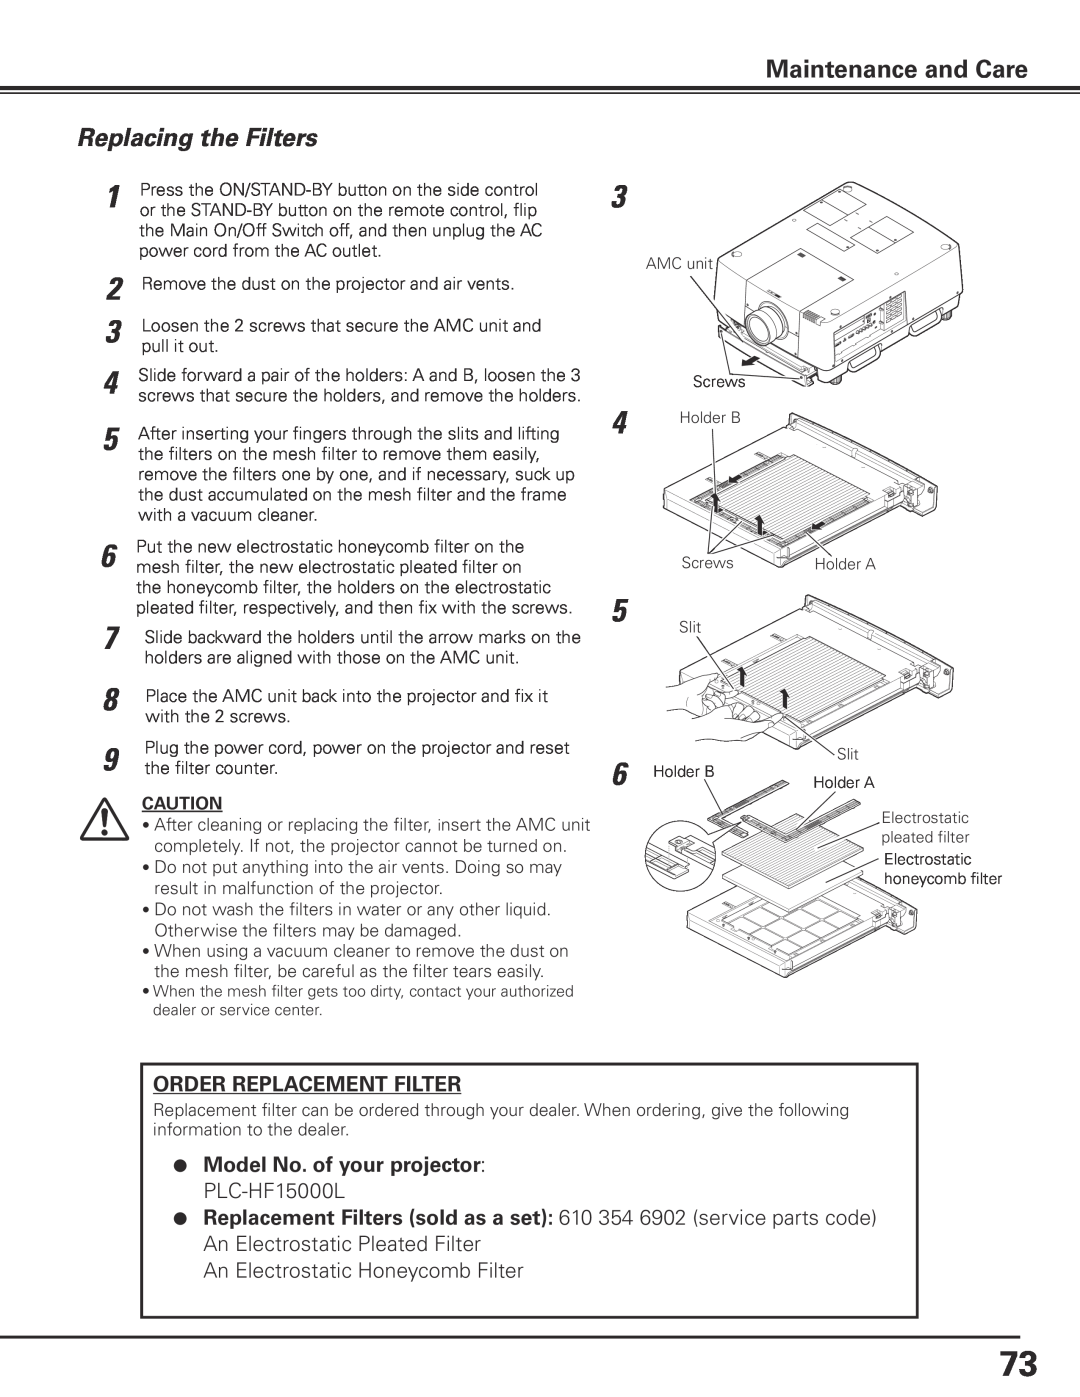 Sanyo HF15000L owner manual 3 4 5 6, Maintenance and Care, Replacing the Filters 